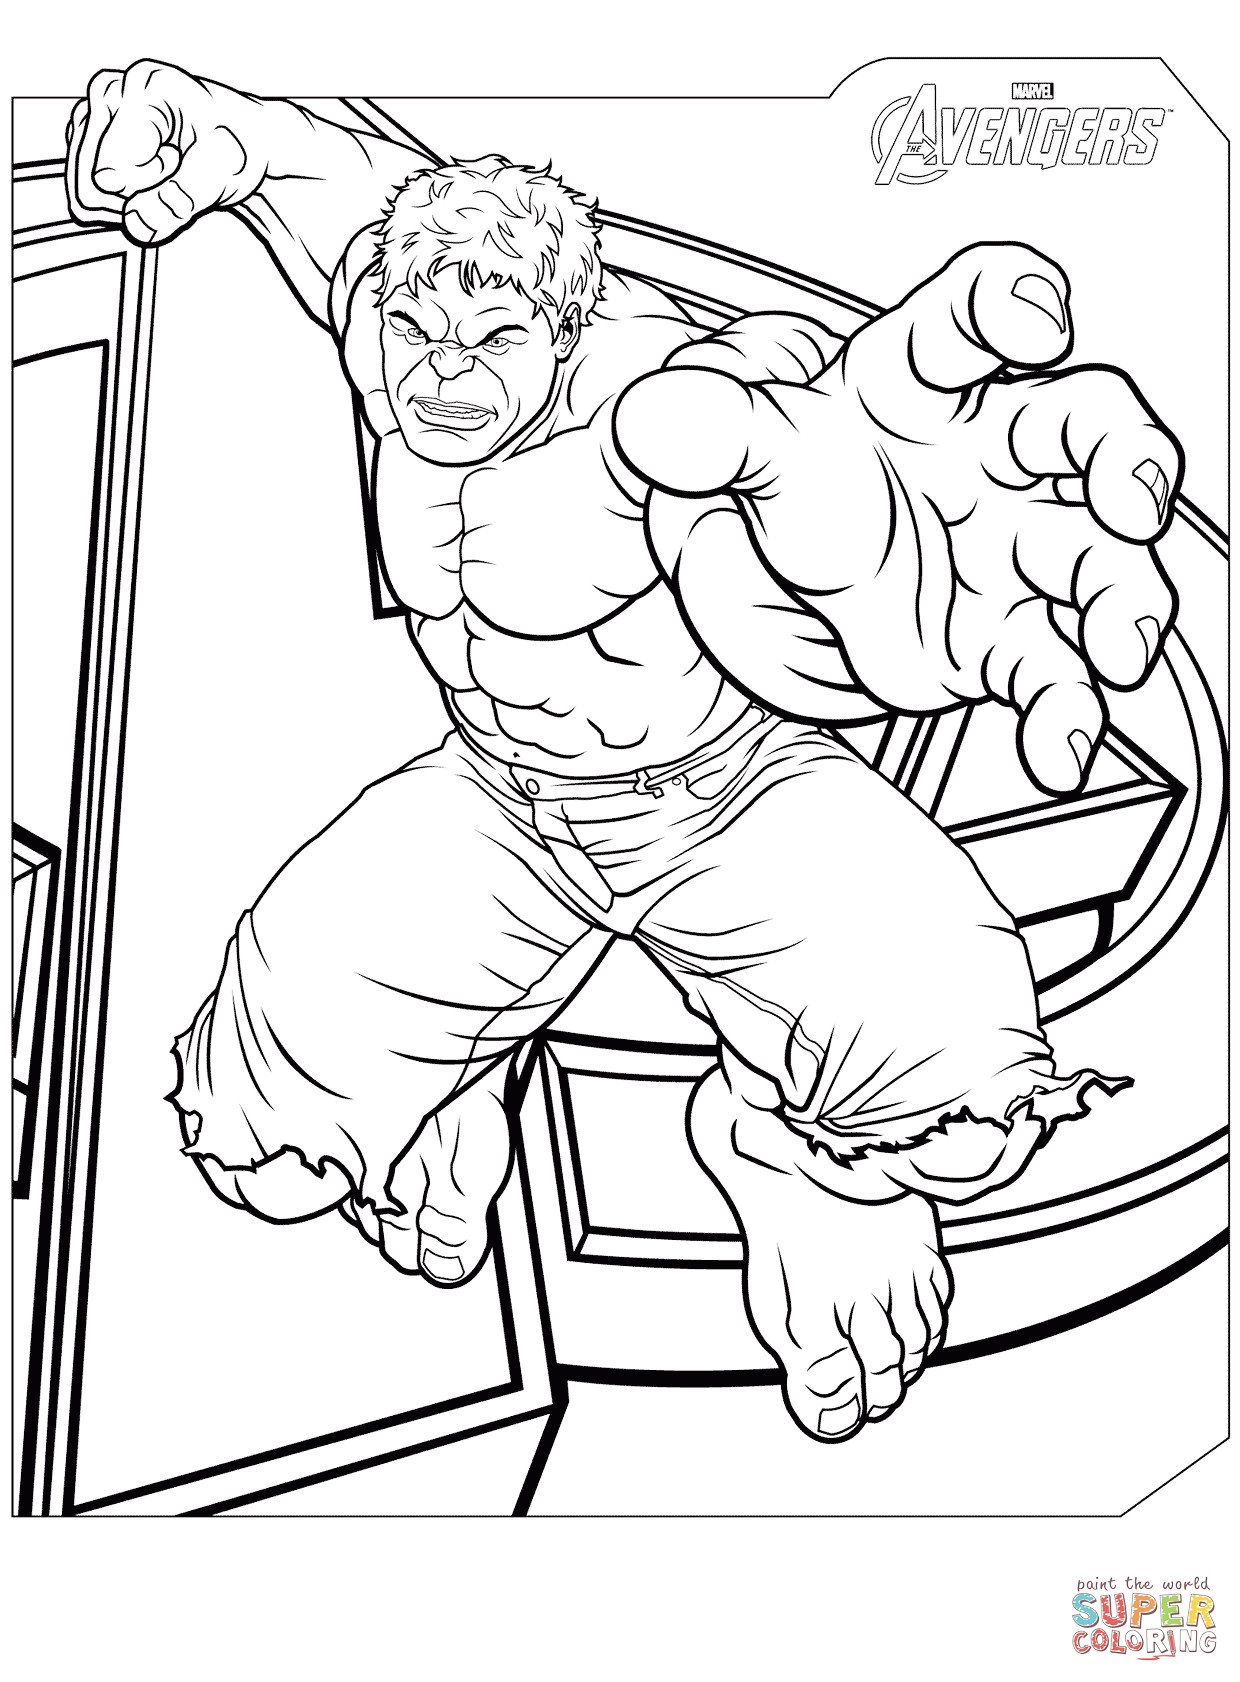 Printable Avengers Coloring Pages
 Avengers Hulk coloring page